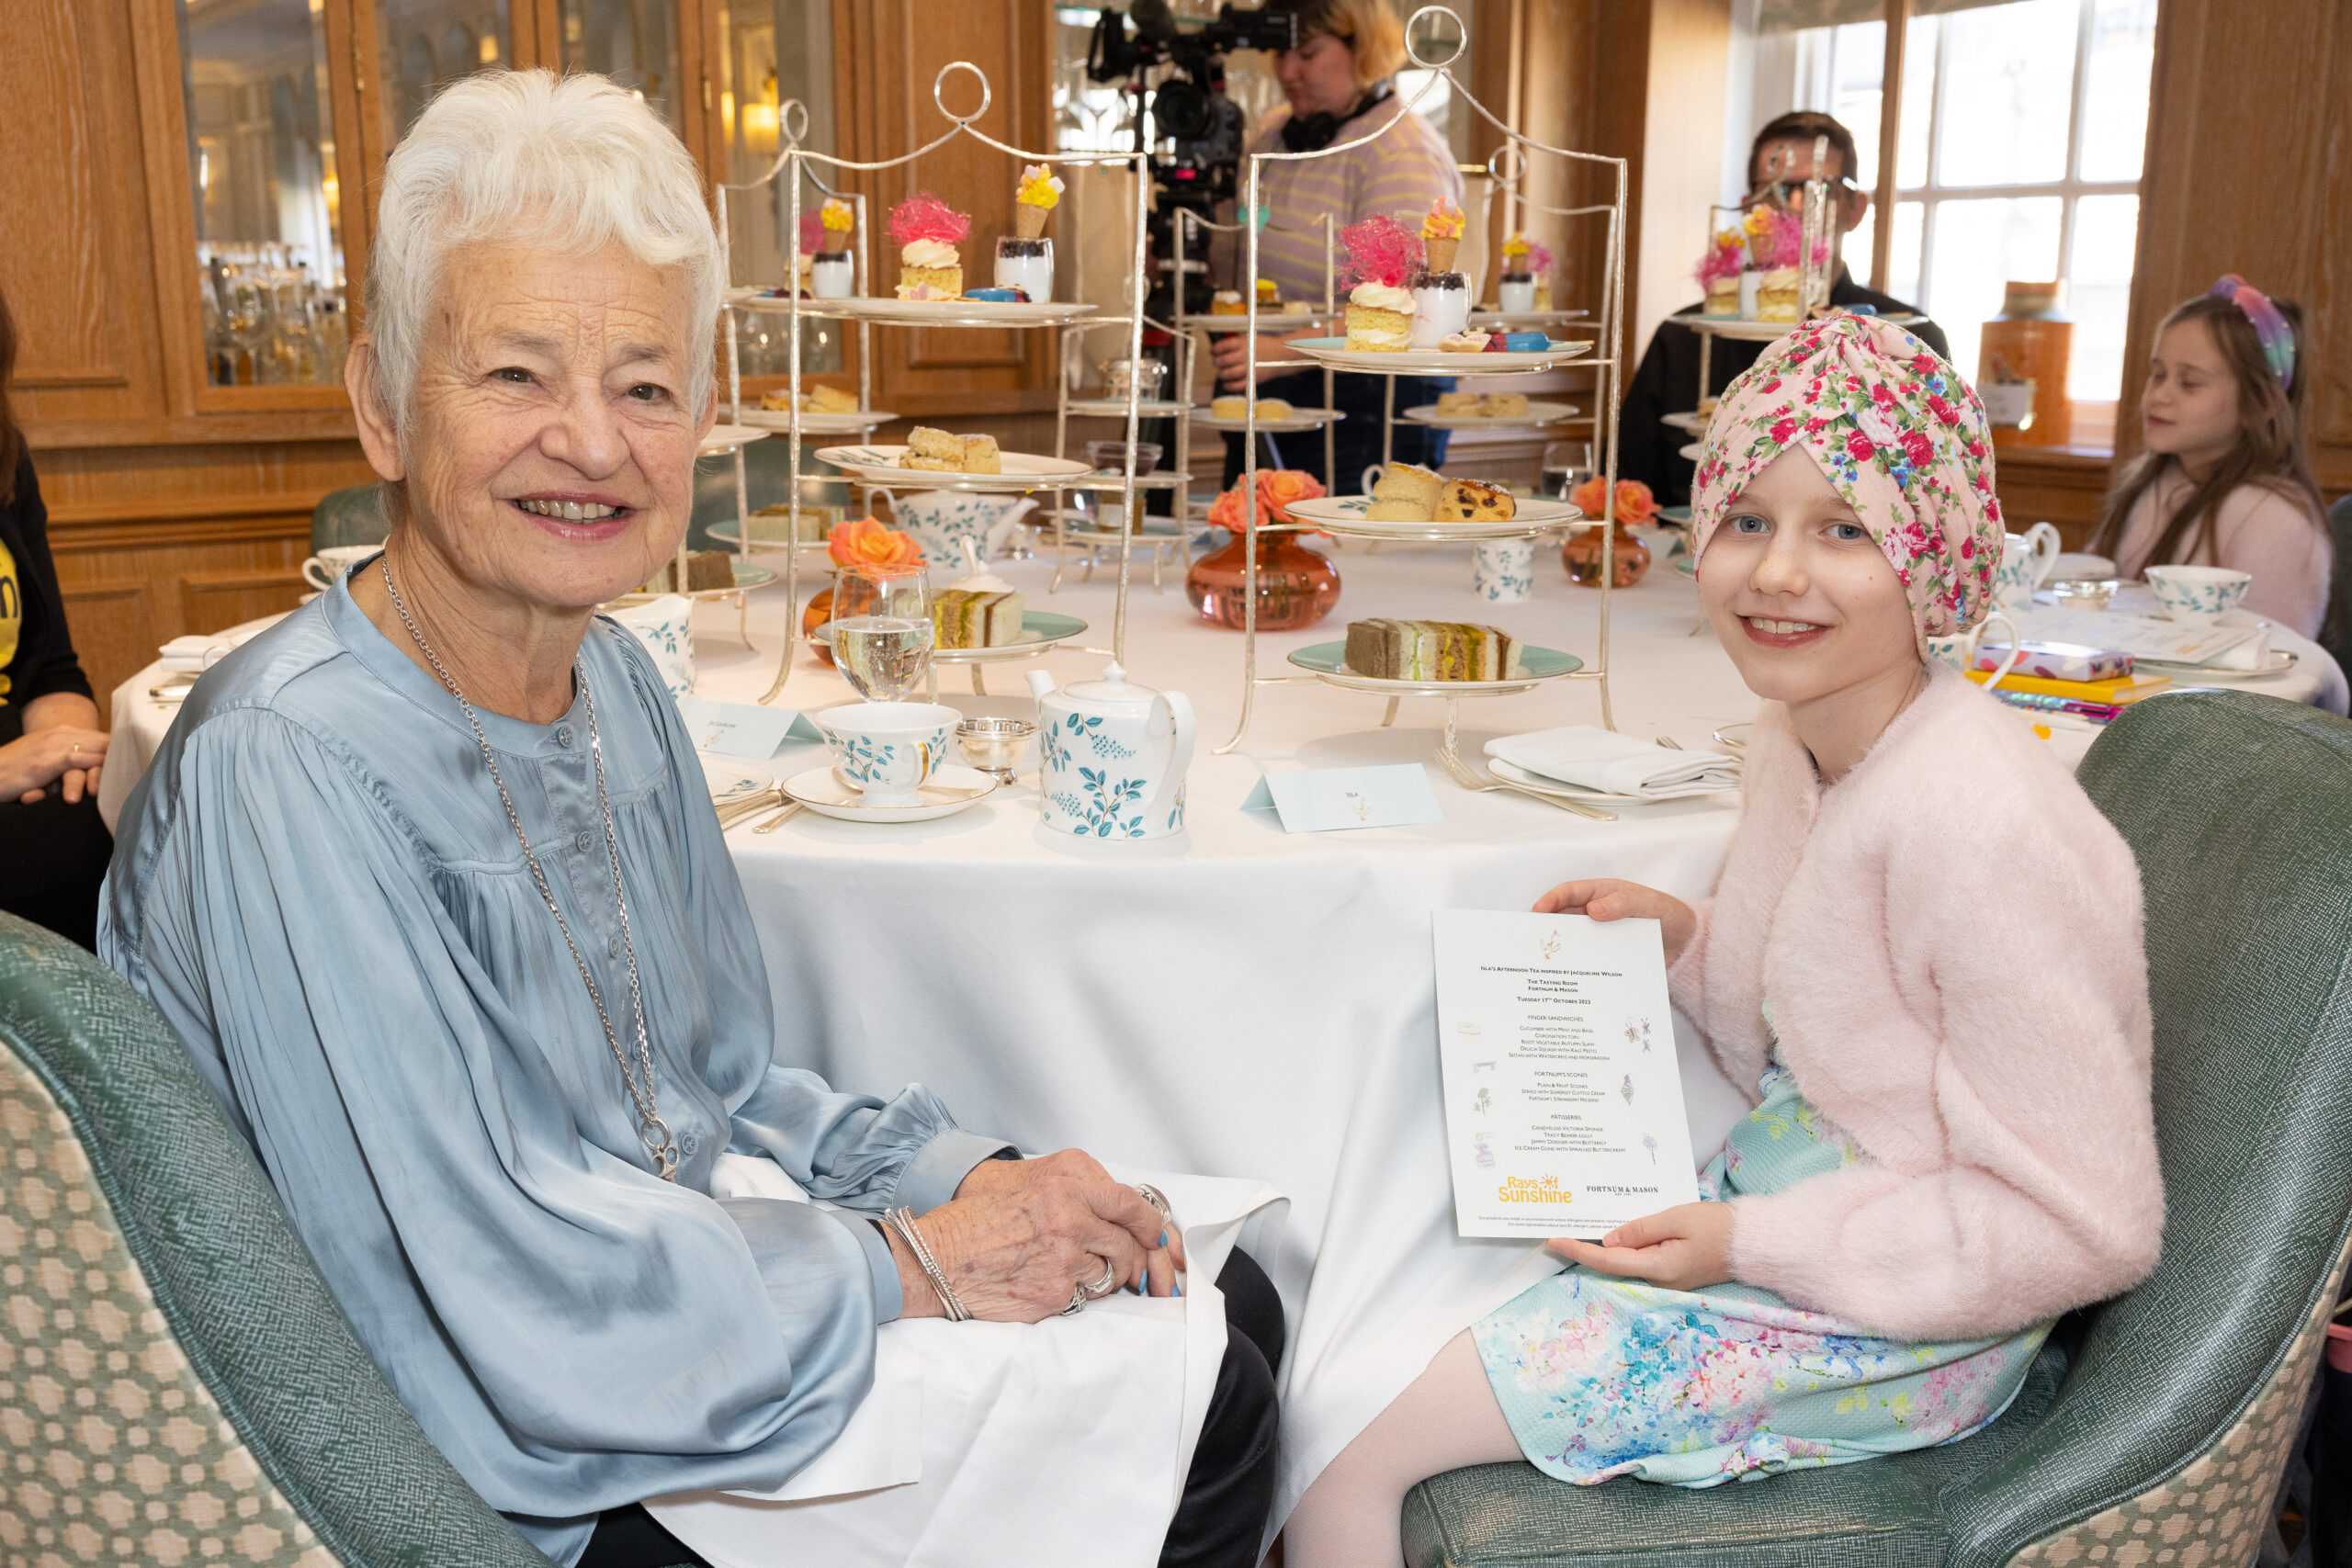 Little girl in pink cardigan and floral headscarf sits next to and smiles with older woman with short white hair and a silky blue shirt.